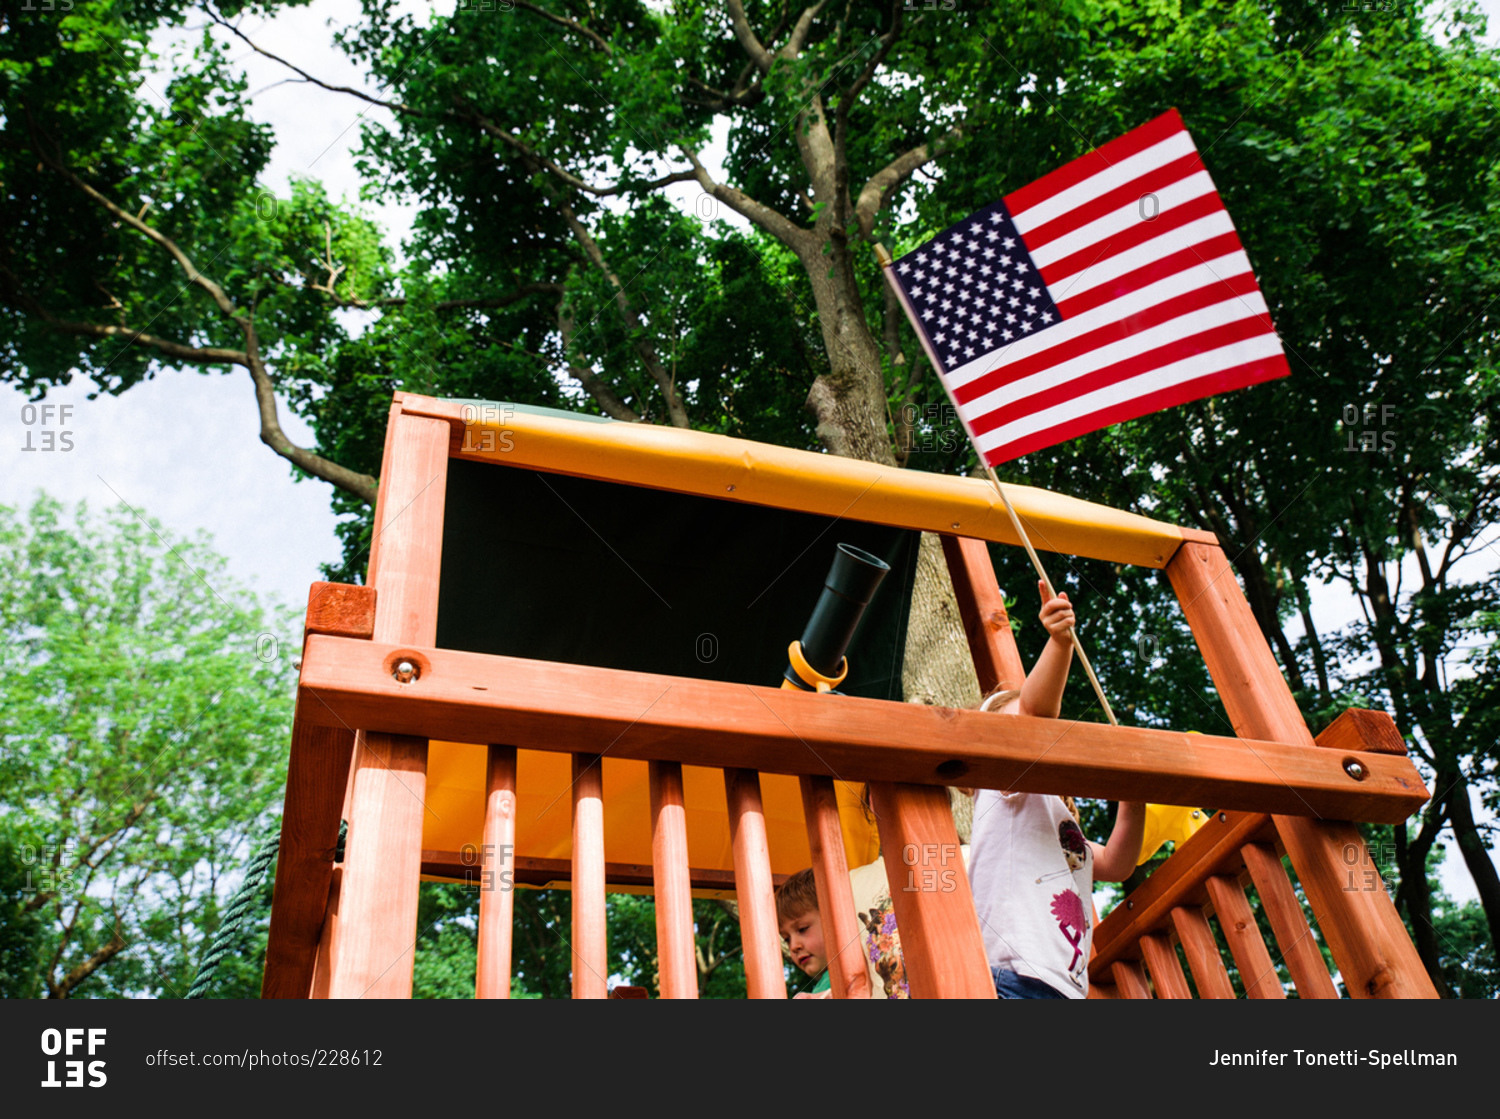 Child waving an American flag out of a play fort